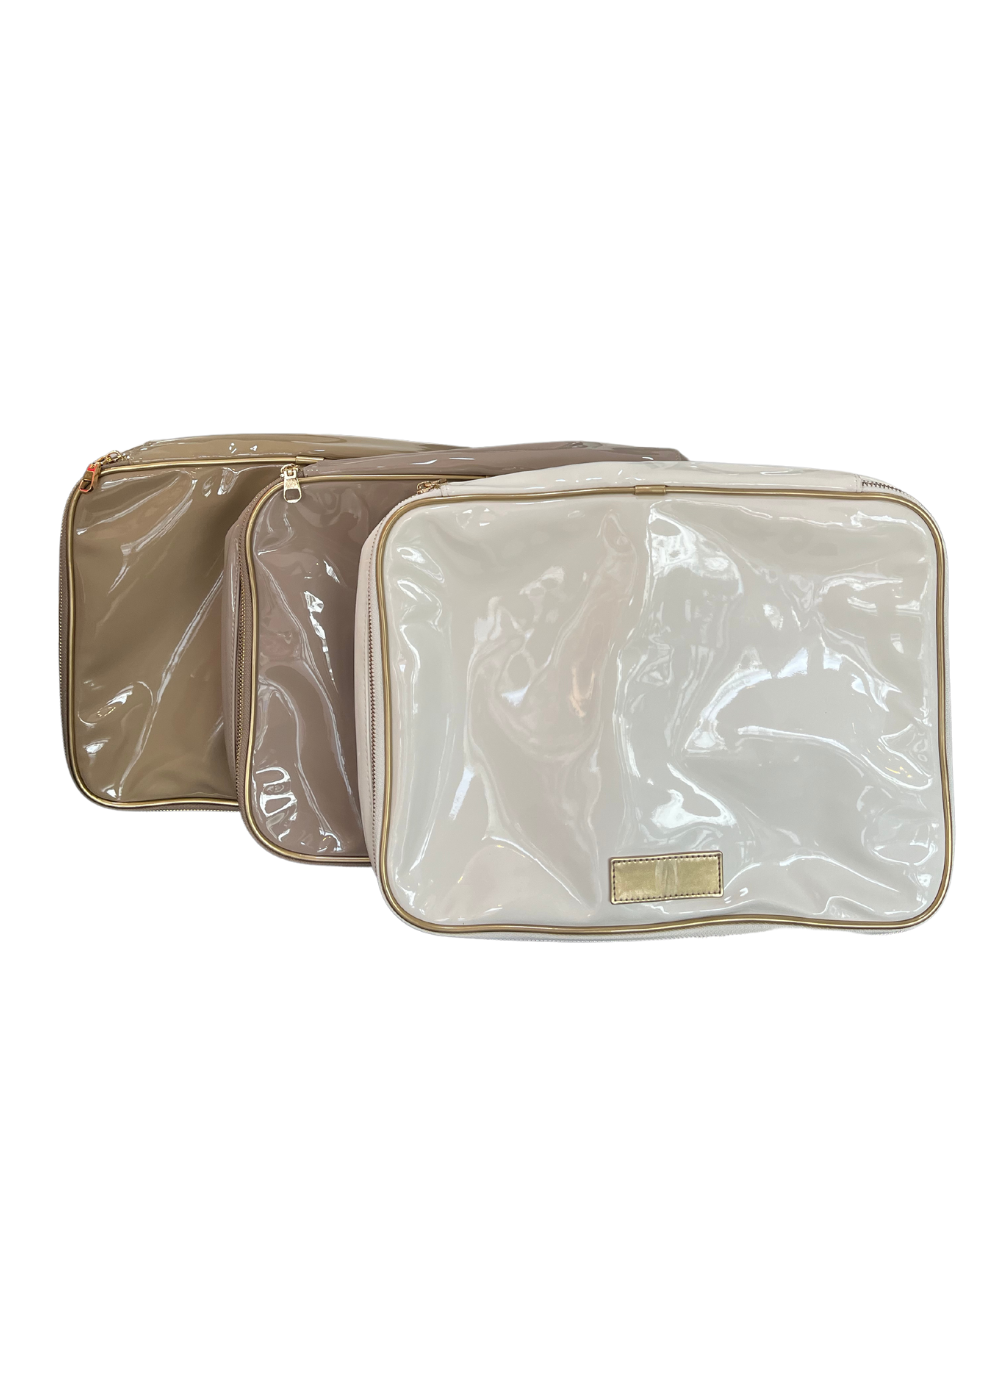 Patched Pops  Luggage Organizers (Set of 4)